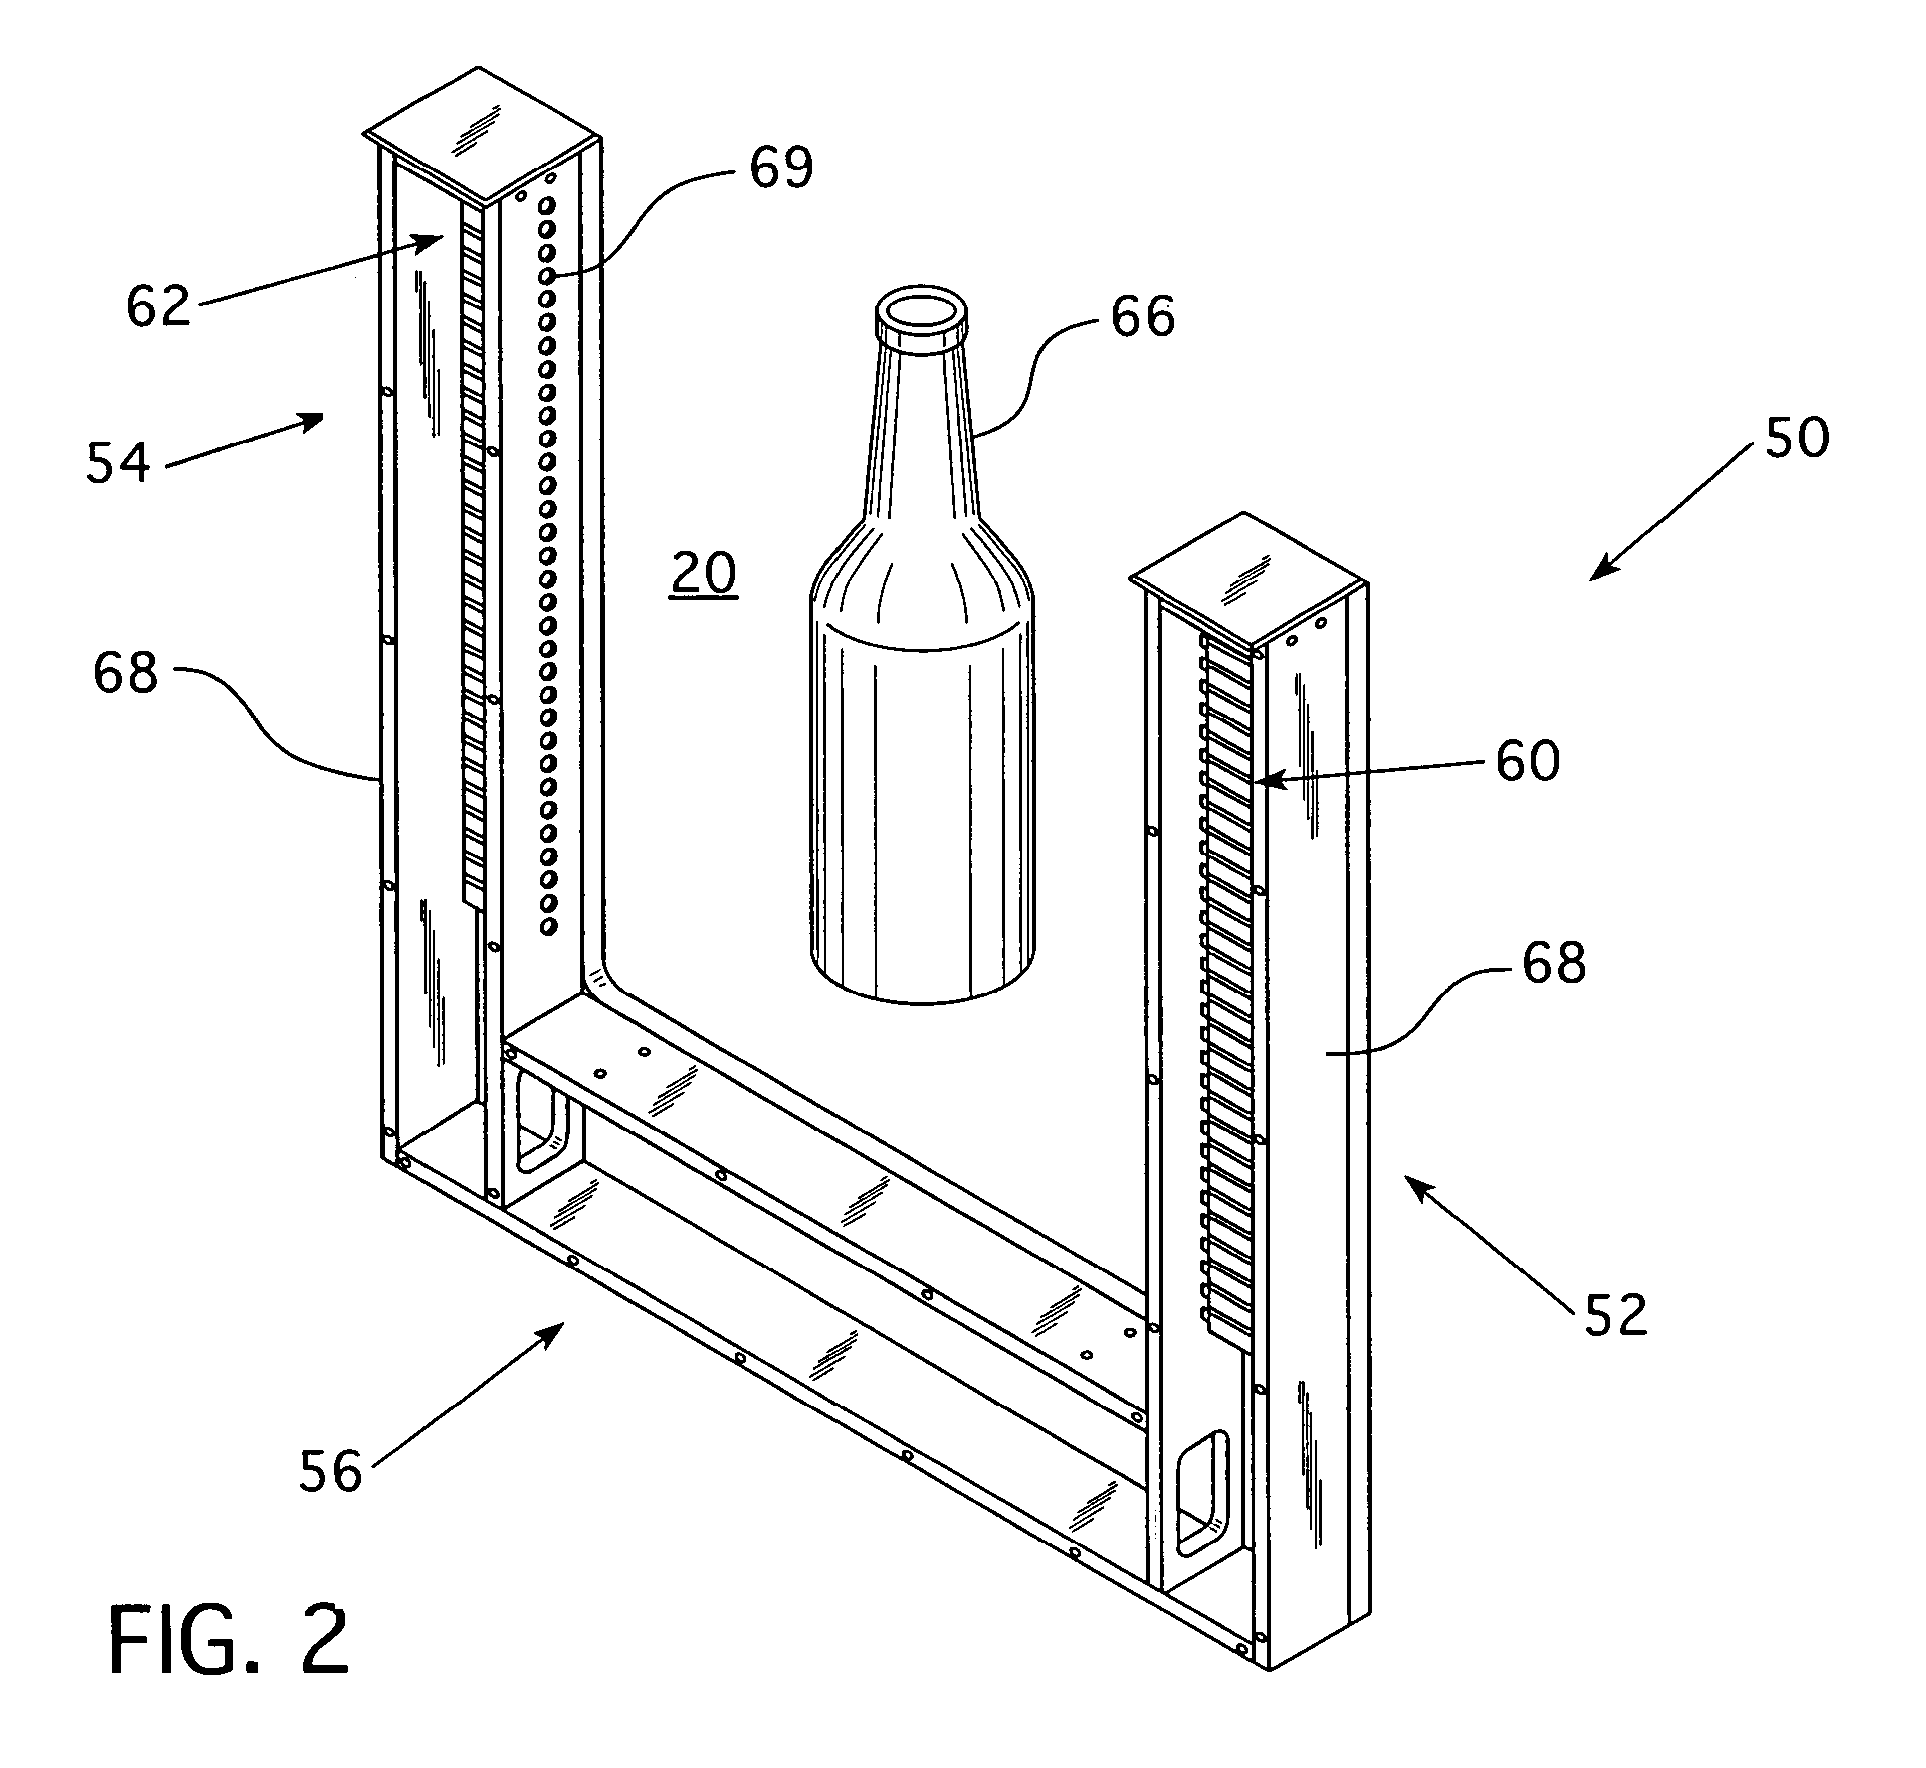 In-line inspection system for vertically profiling plastic containers using multiple wavelength discrete spectral light sources